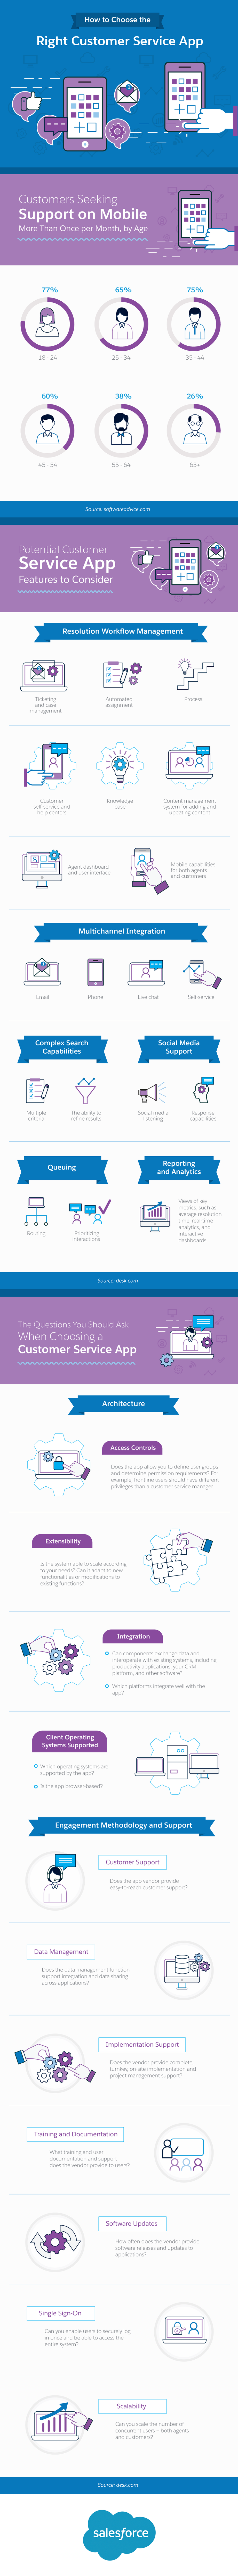 How to Choose the Right Customer Service App